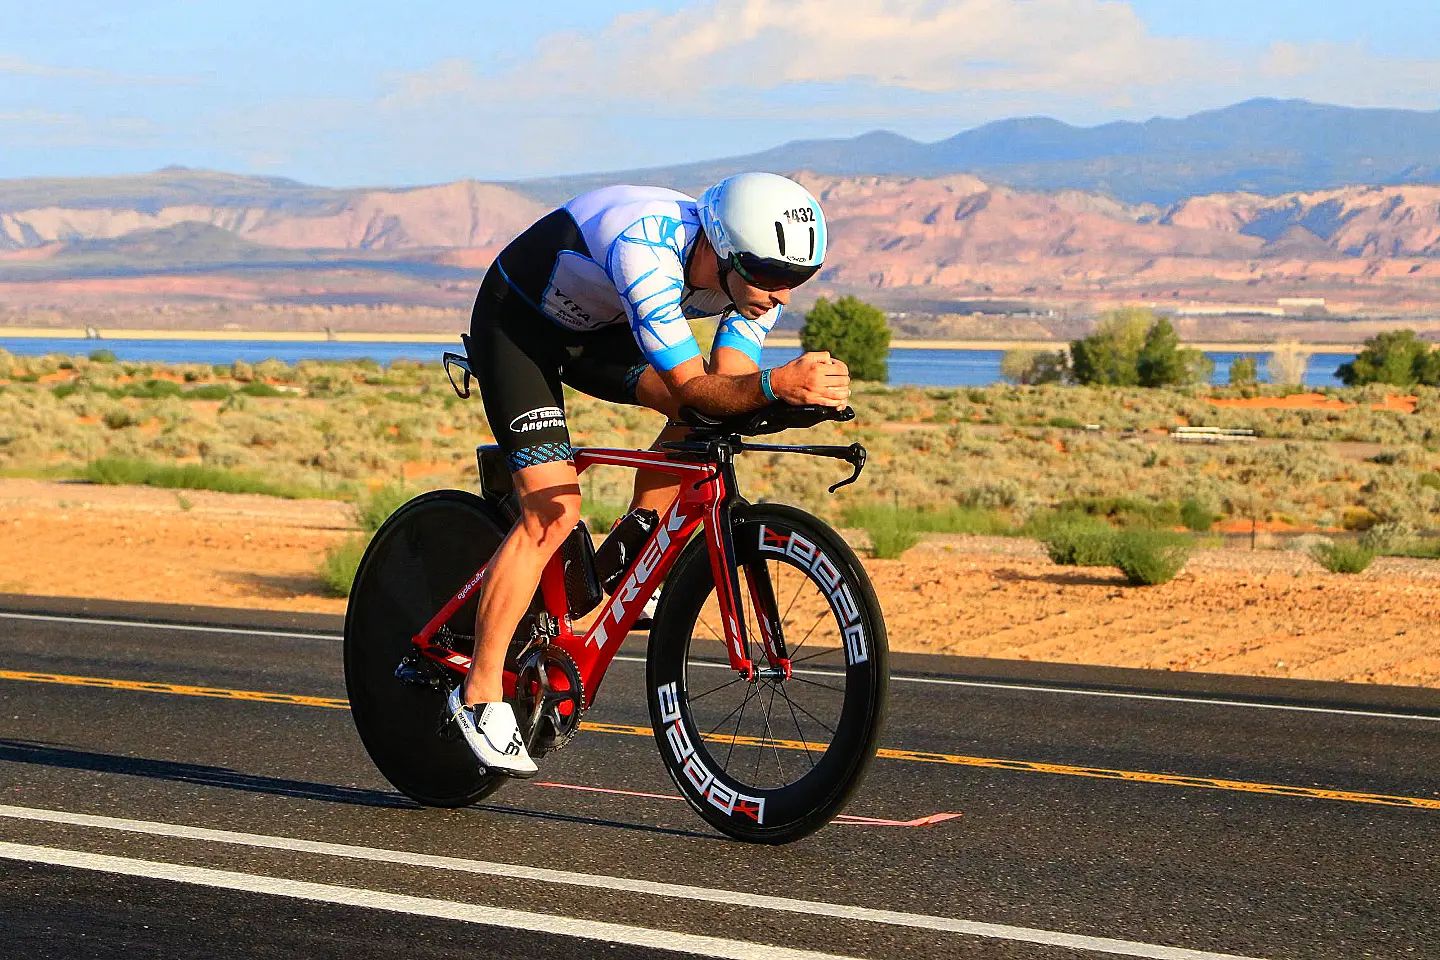 #throwbackthursday to last September when I was racing the #ironman703worldchampionship in #stgeorge .
Just 2 more days before the #worldchampionship will take place at this stunning race course. 🏊🏼‍♂️🚵🏽‍♂️🏃🏽‍♂️
Because I'm starting this year as a pro I'm not allowed to race in St. George and Kona later in the year, because my qualifications were "only" for the Age Group races.
Nevertheless I'm excited what's going on this weekend in #Utah.
My fingers crossed for @katr_matthews 🤩💪🏽👍🏼

And of course a few hours earlier the #ironman703mallorca takes place with a lot of good friends and training partners like @rubentenpoints ,@lukas_kraemer_808 @marcus.herbst and many more.

So a big #triathlon weekend ahead 🤩💪🏽🤙🏼